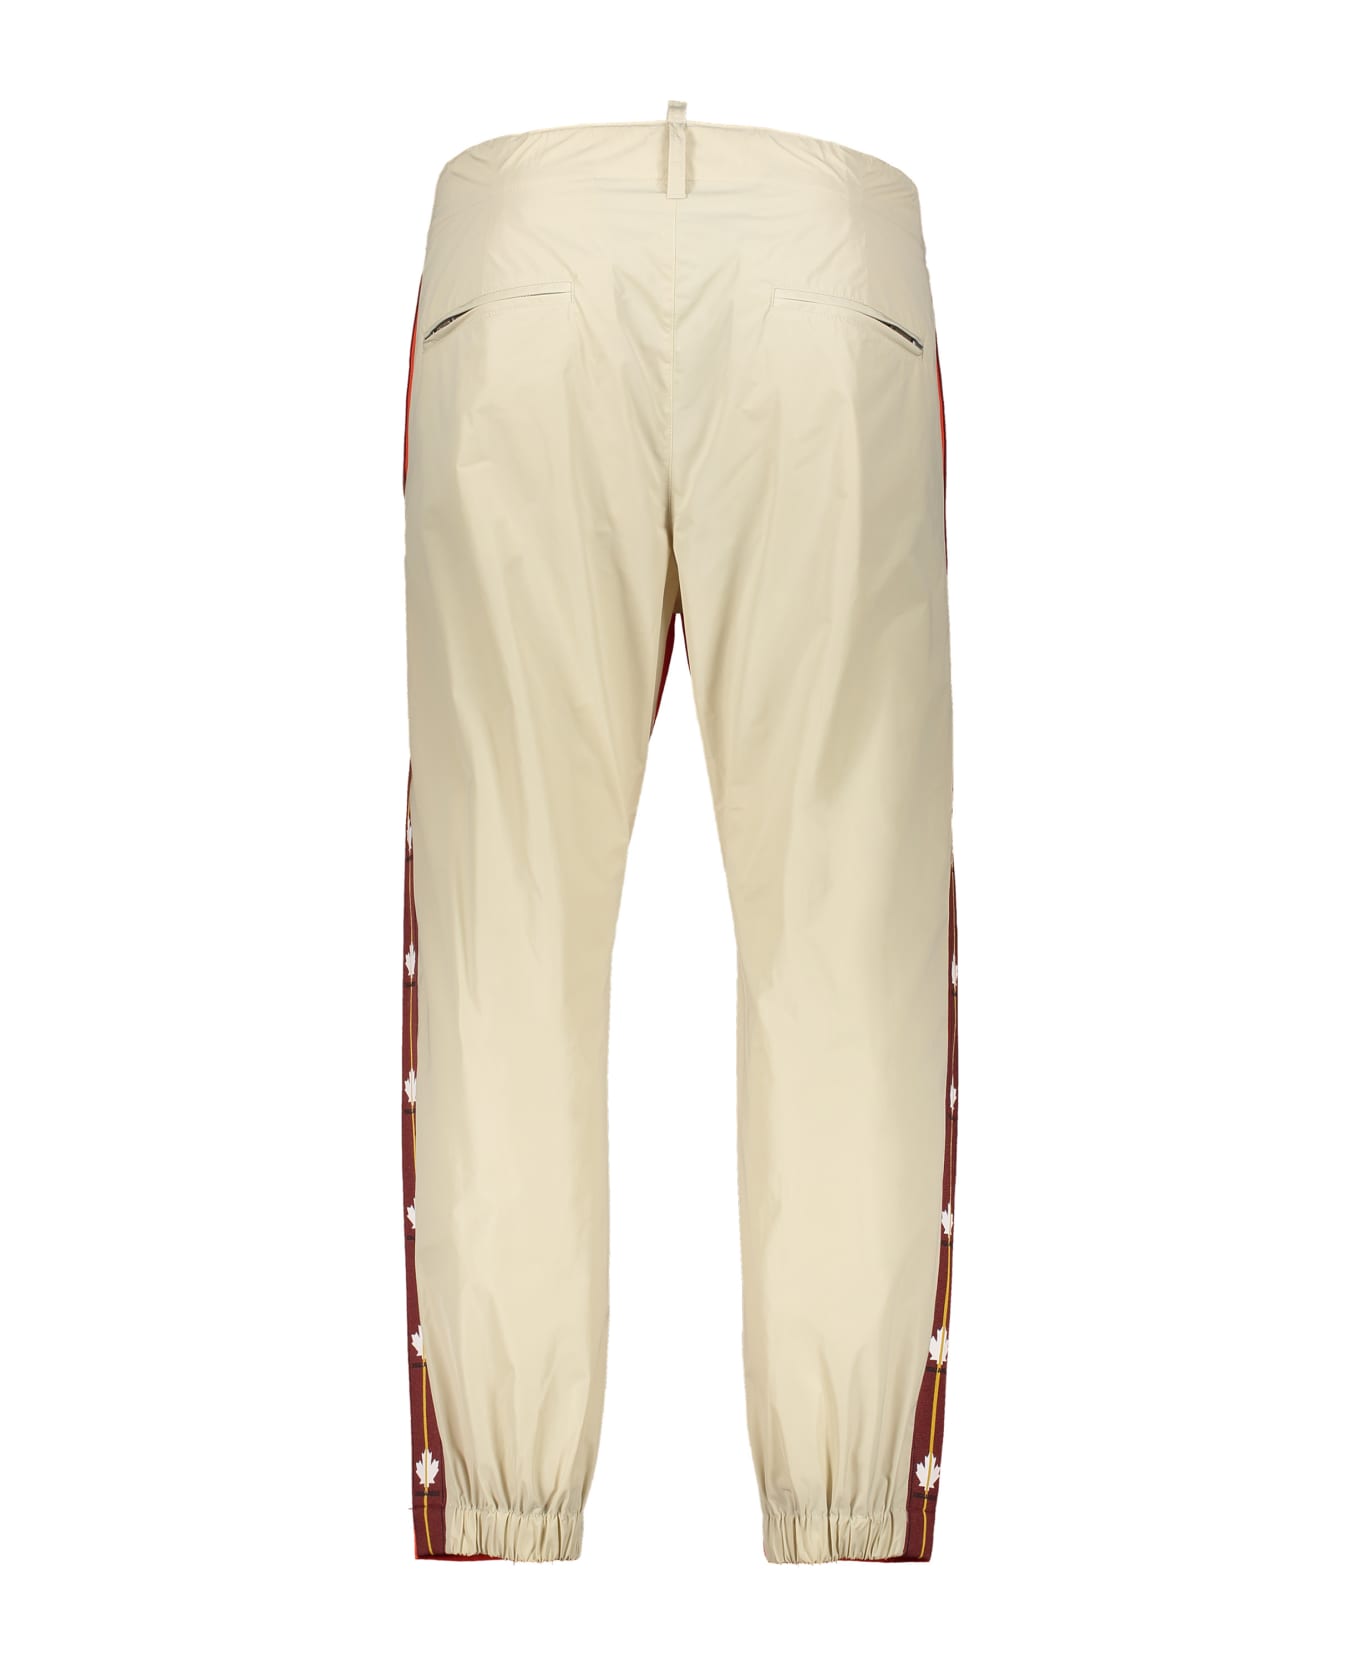 Dsquared2 Track-pants With Contrasting Side Stripes - Orange ボトムス